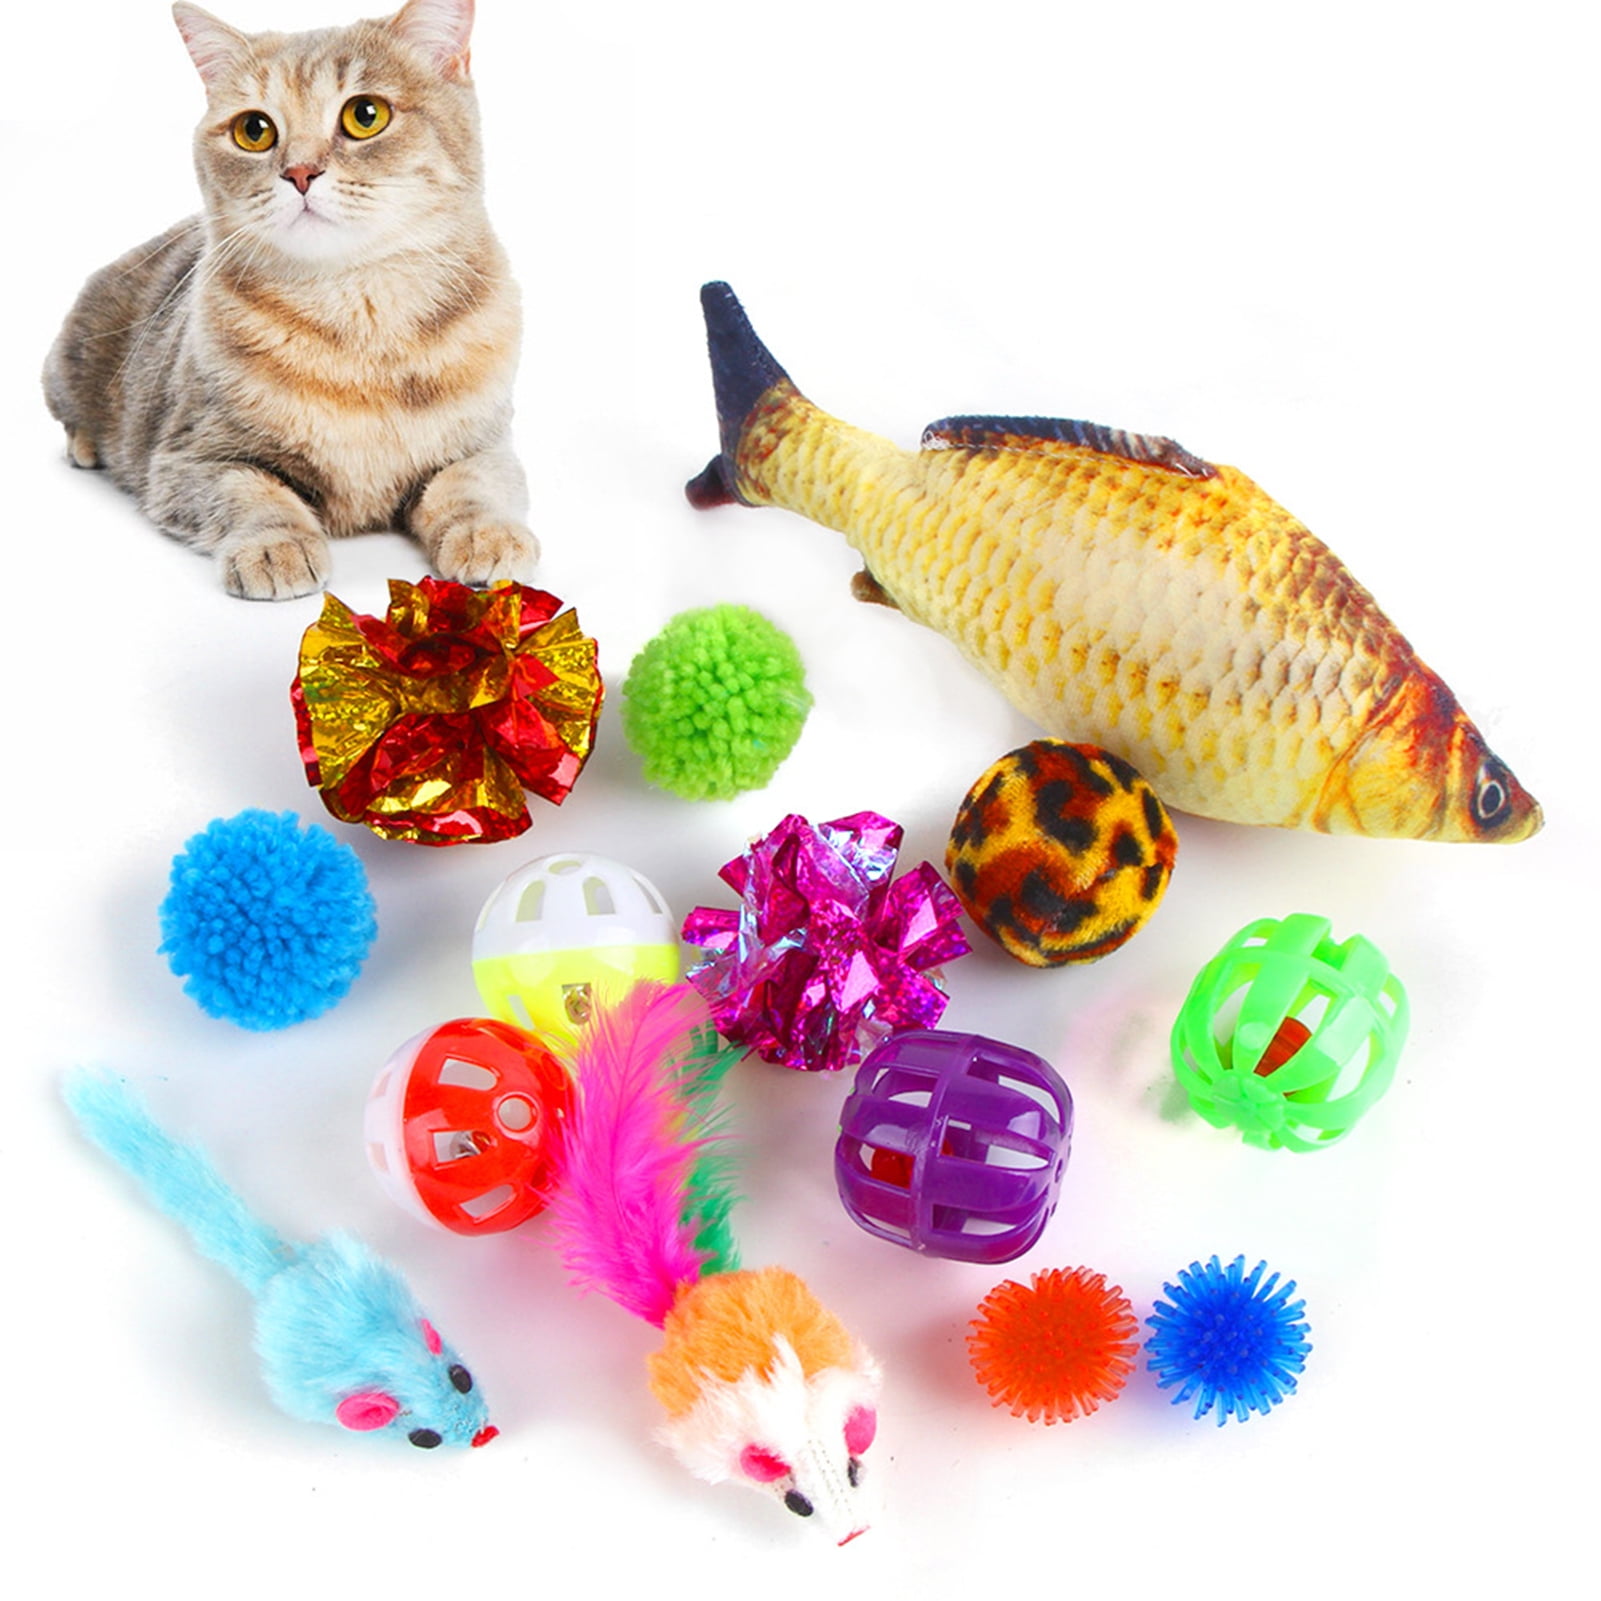 4 Pcs Cat Toys Mouse Fish Ball Feather Toy Funny Pet Teaser Catnip Toy 